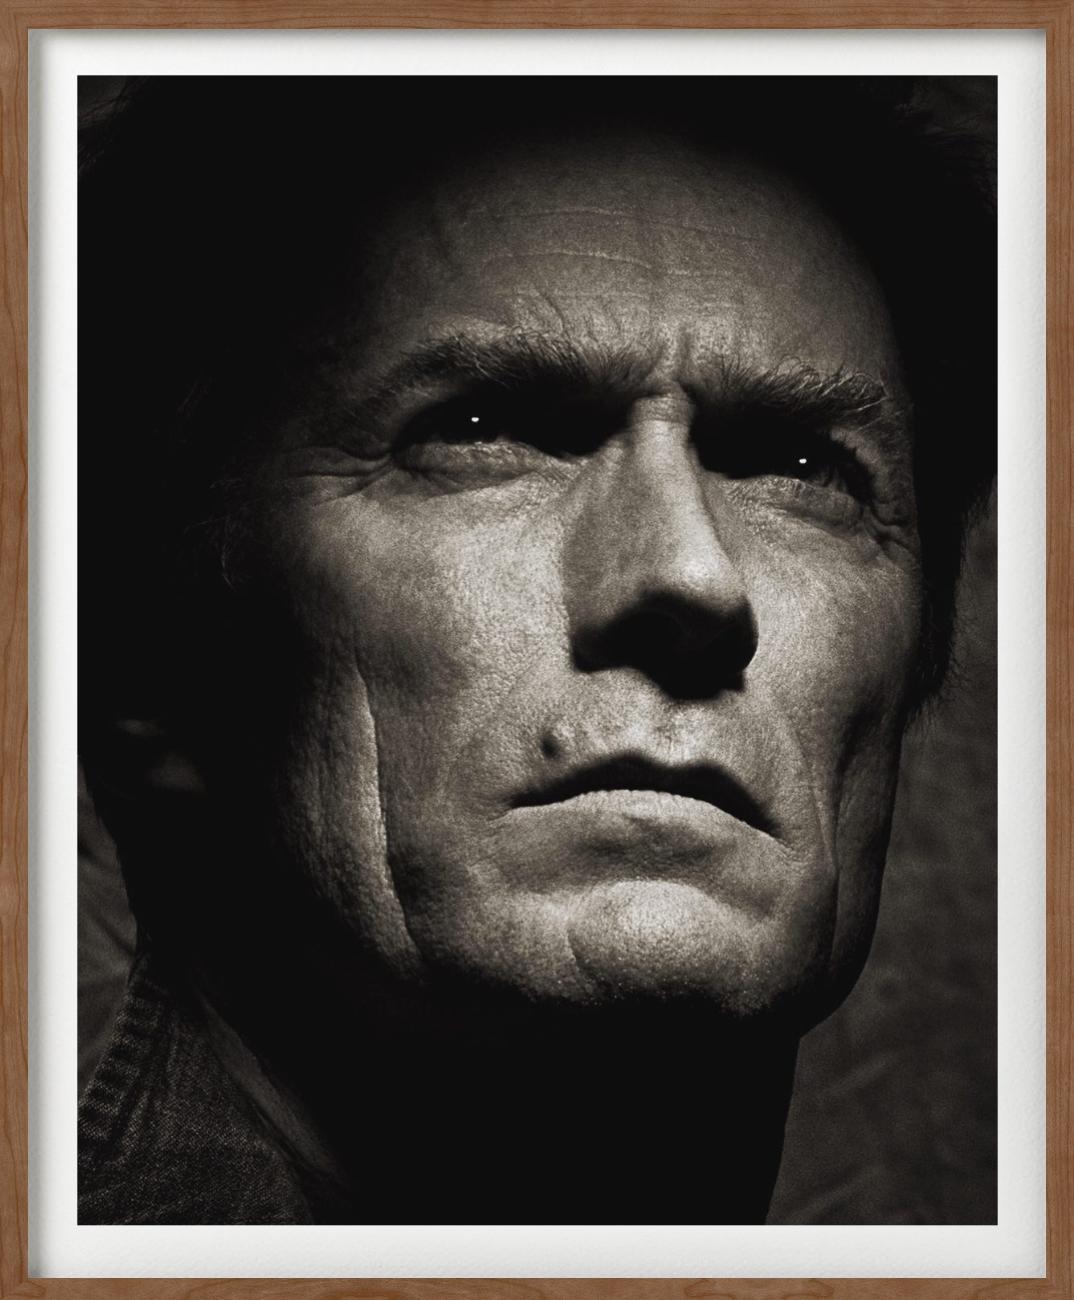 'Clint Eastwood' - Portrait for the Rolling Stone, fine art photography, 1985 - Contemporary Photograph by Albert Watson